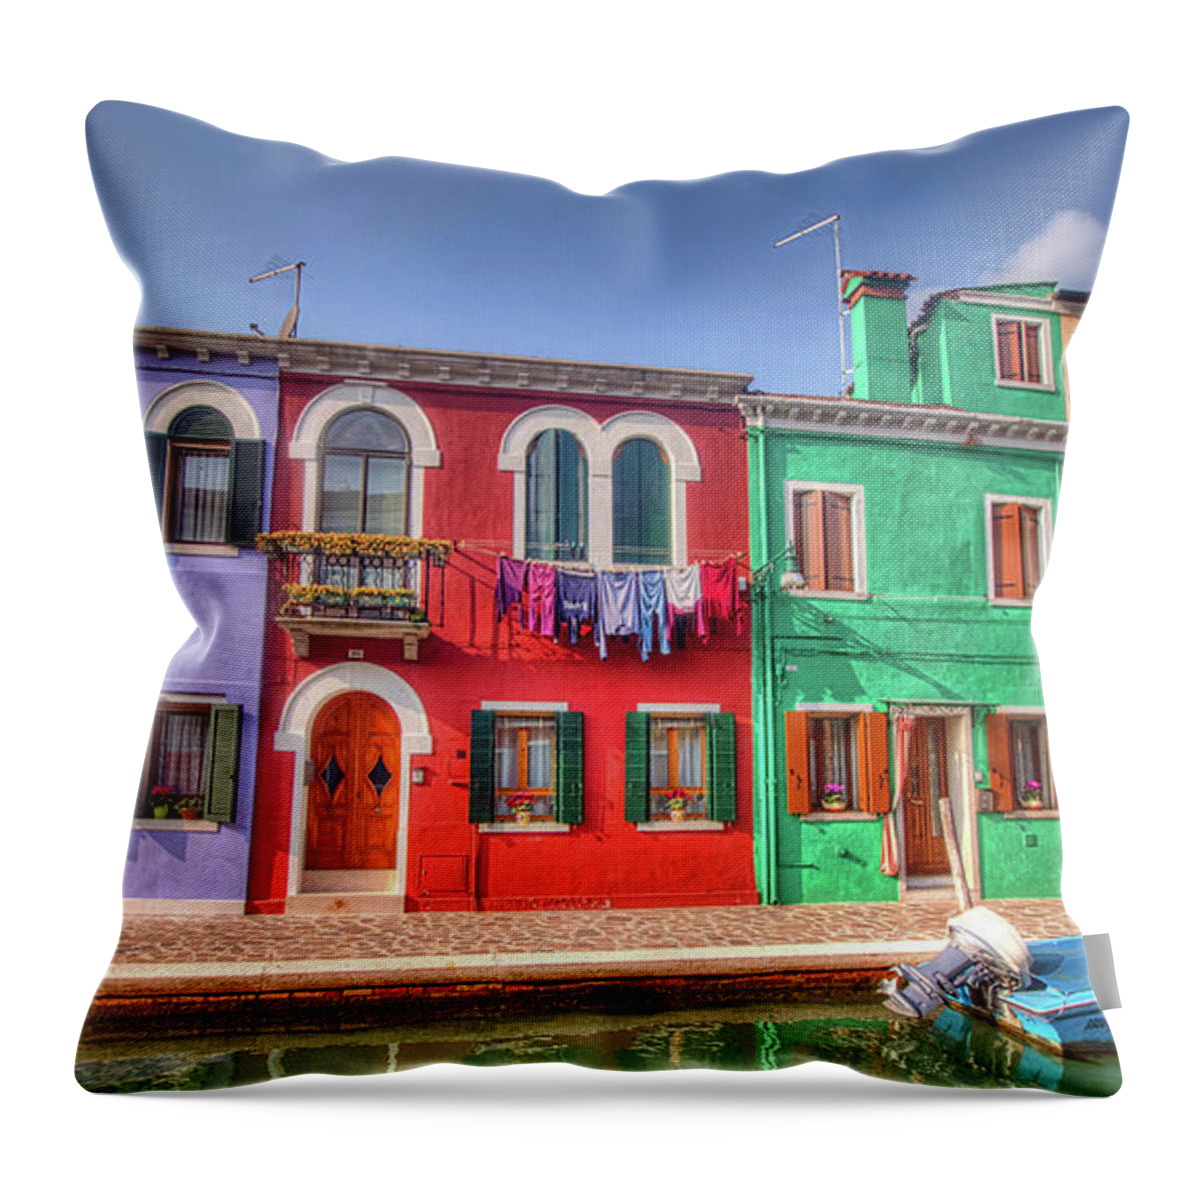 Burano Venice Italy Throw Pillow featuring the photograph Burano Venice Italy by Paul James Bannerman